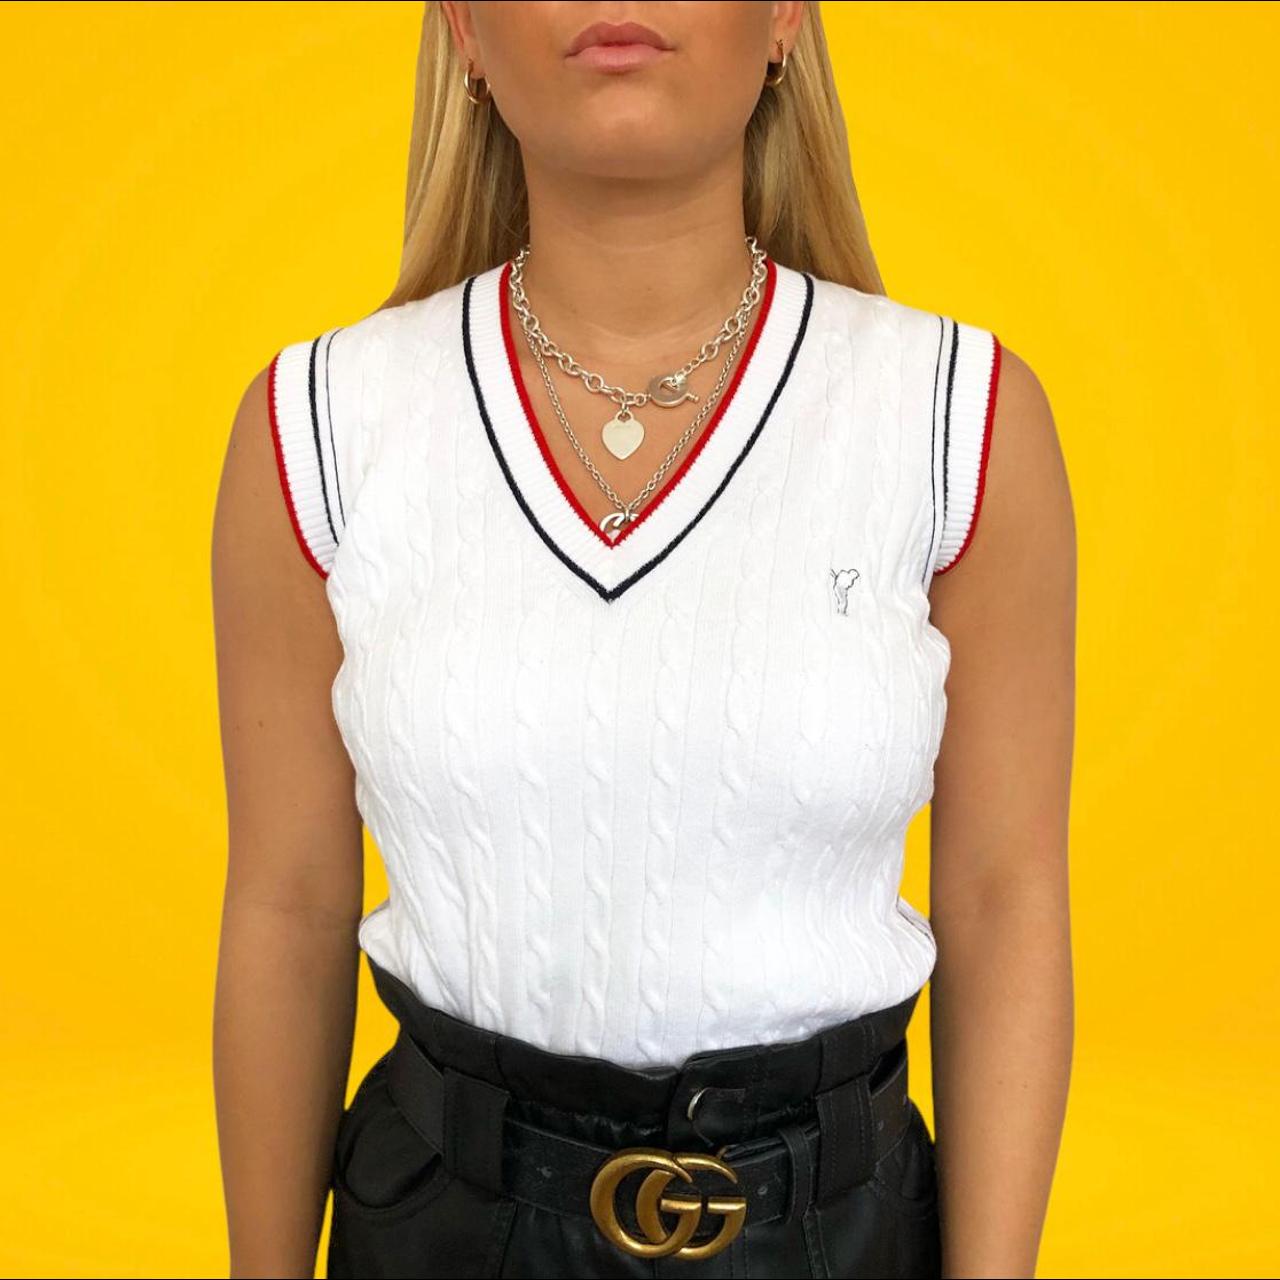 Product Image 1 - Golf sweater jumper

Vintage 90s white